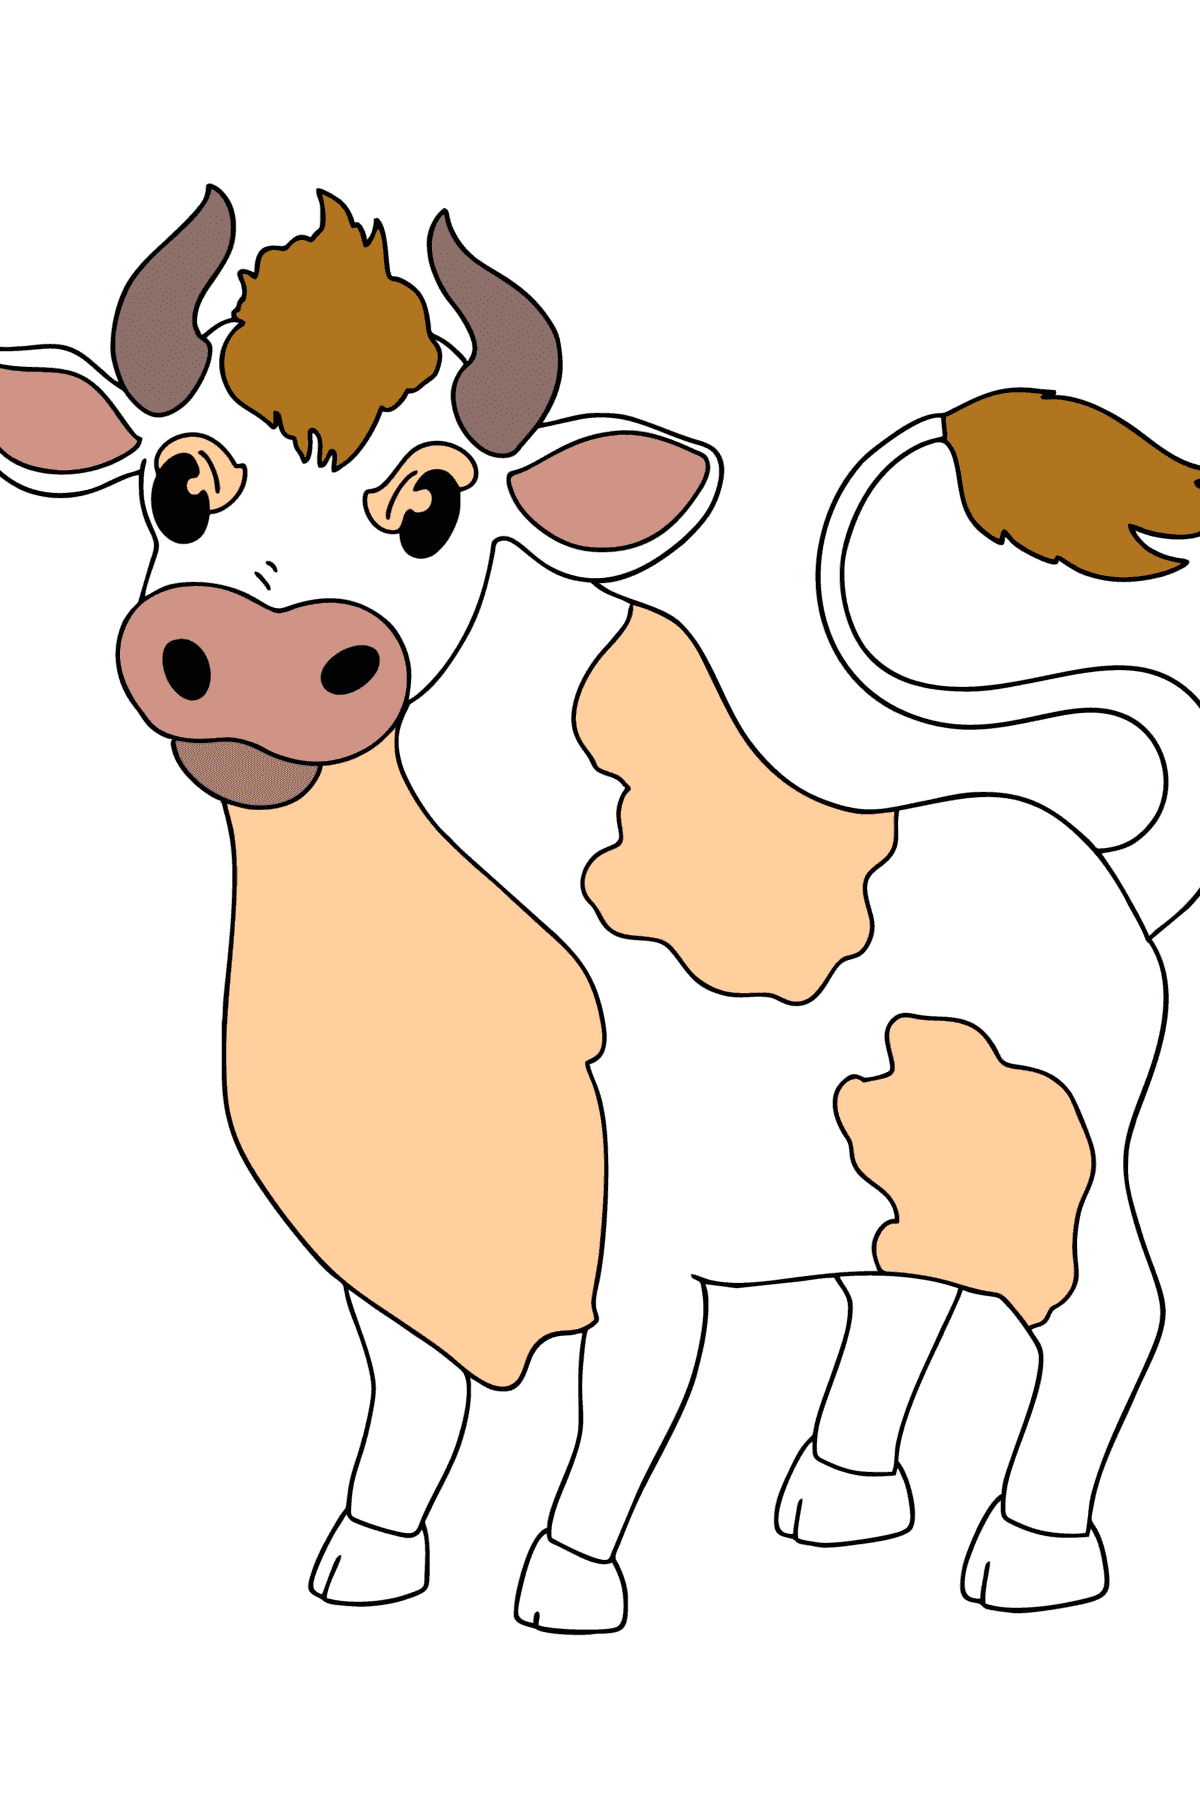 Gray bull coloring page - Coloring Pages for Kids